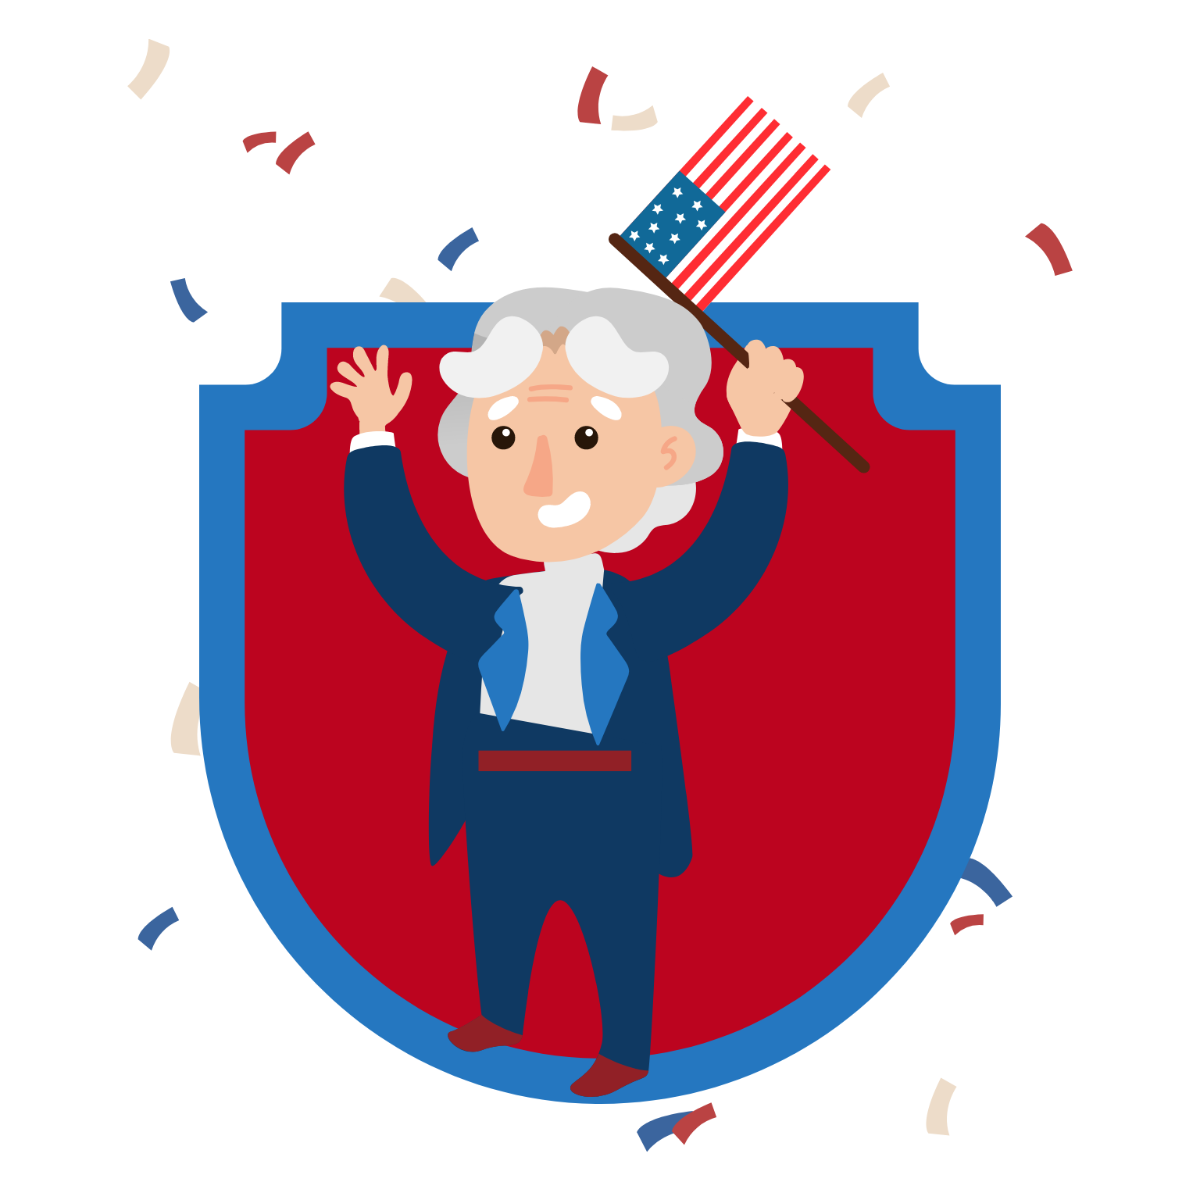 President's Day Holiday Clip Art